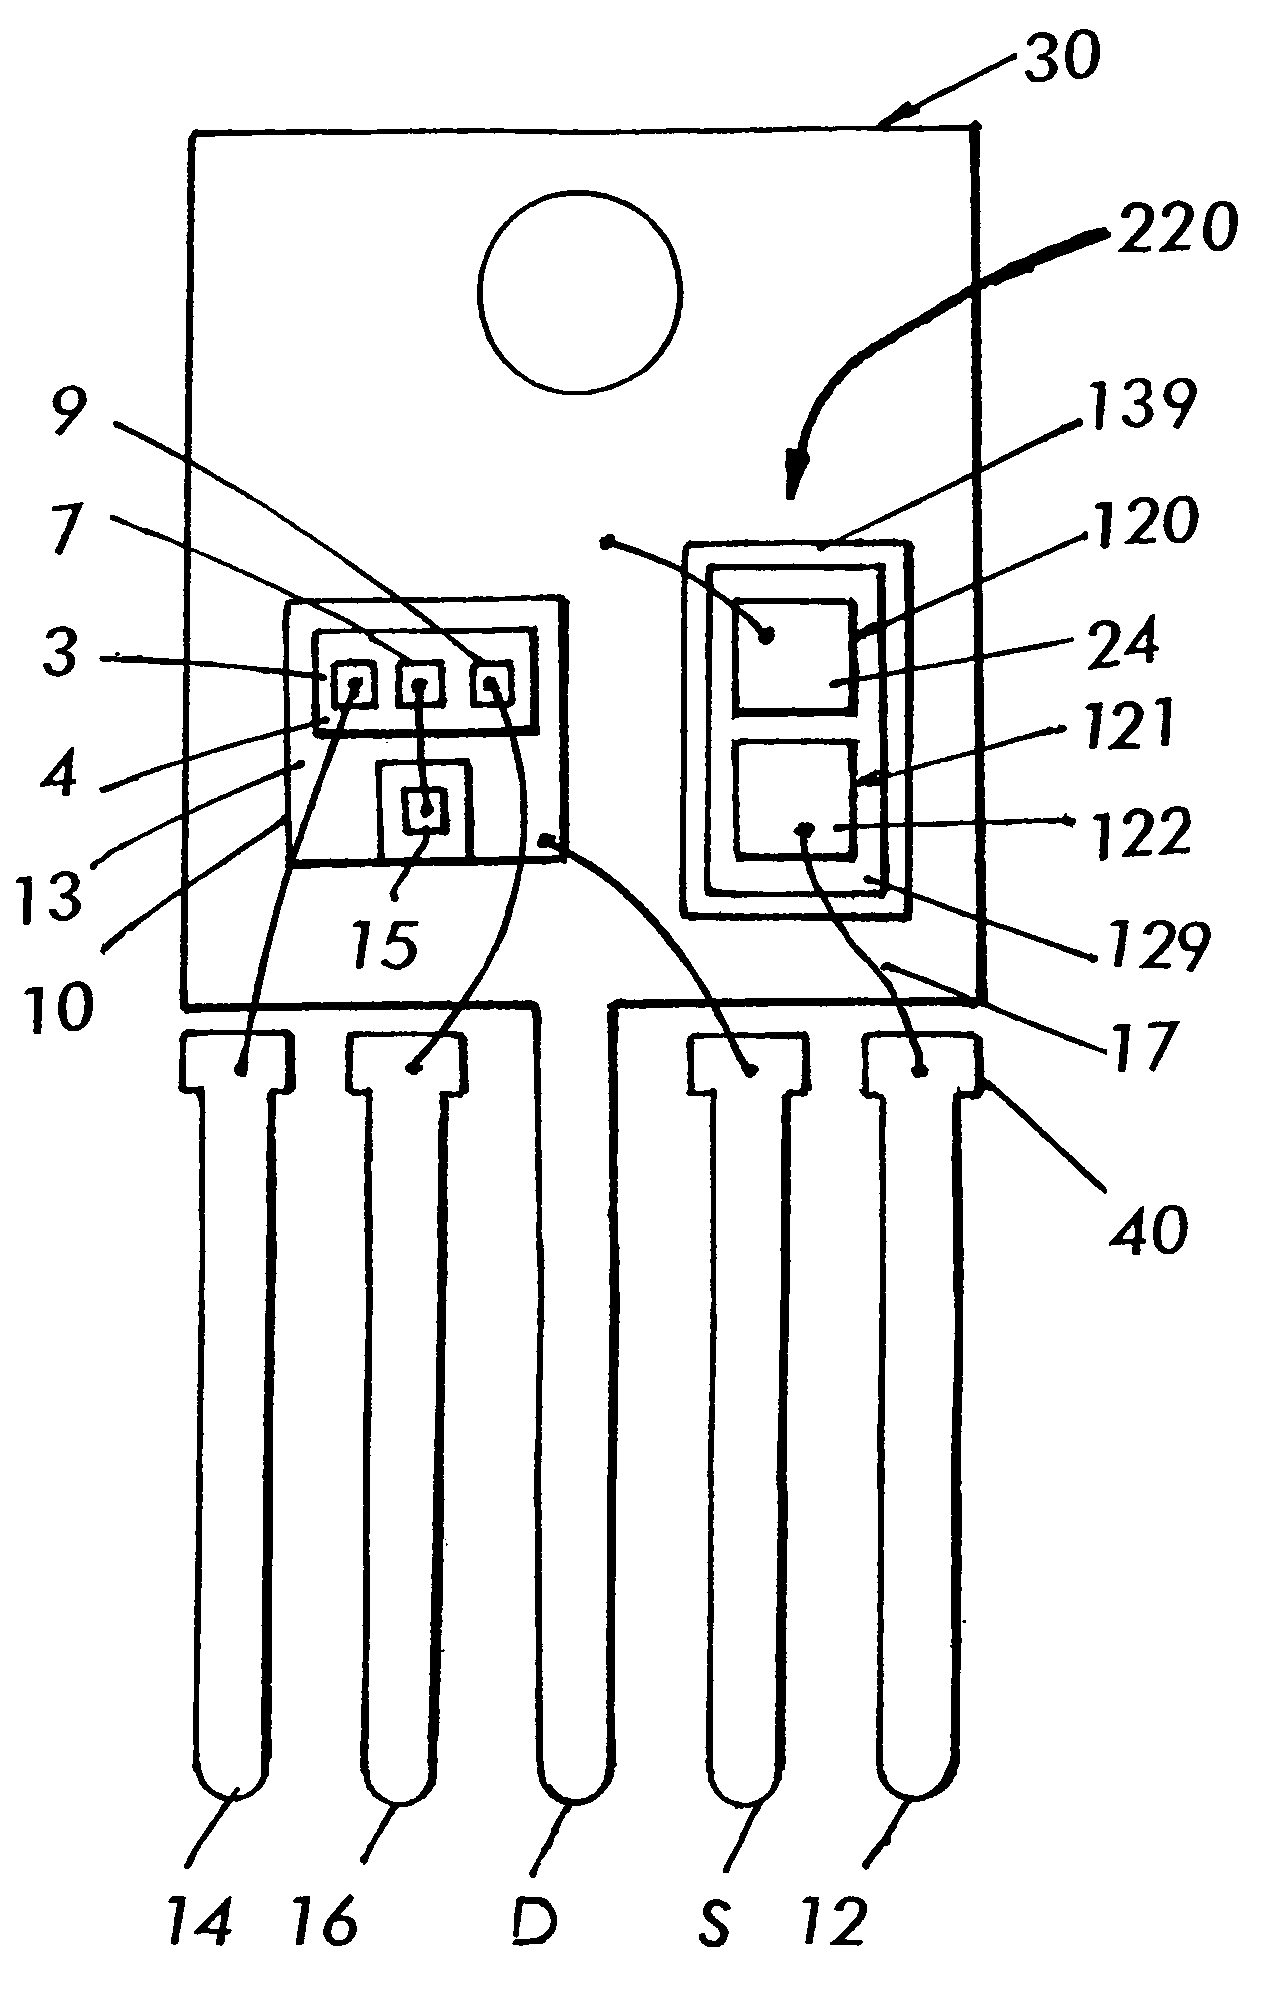 Co-packaged control circuit, transistor and inverted diode